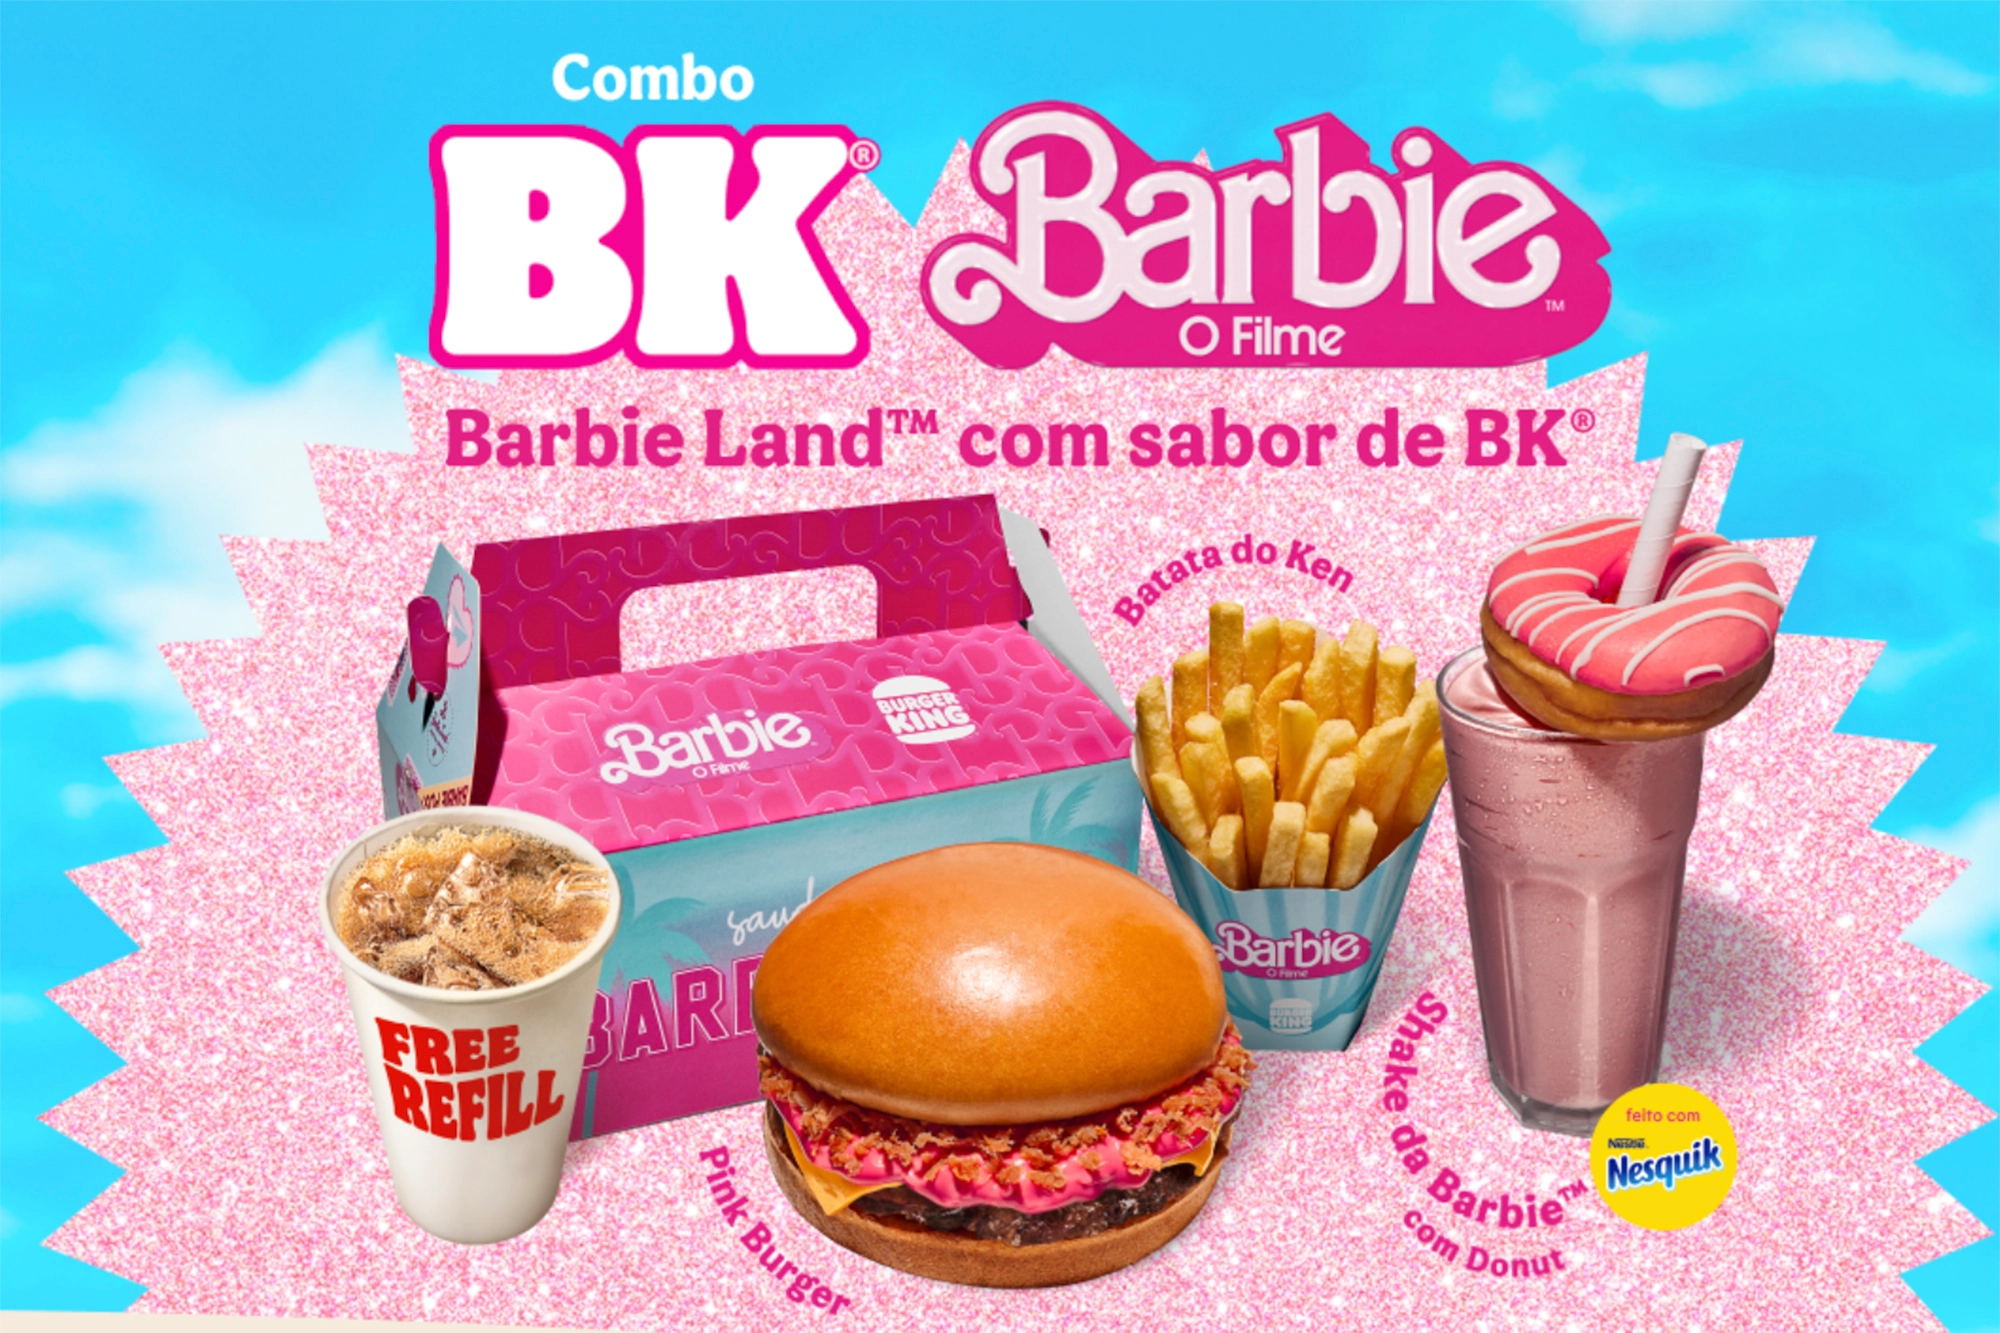 Burger King Brazil Unleashes the Power Of The Barbie Combo Meal